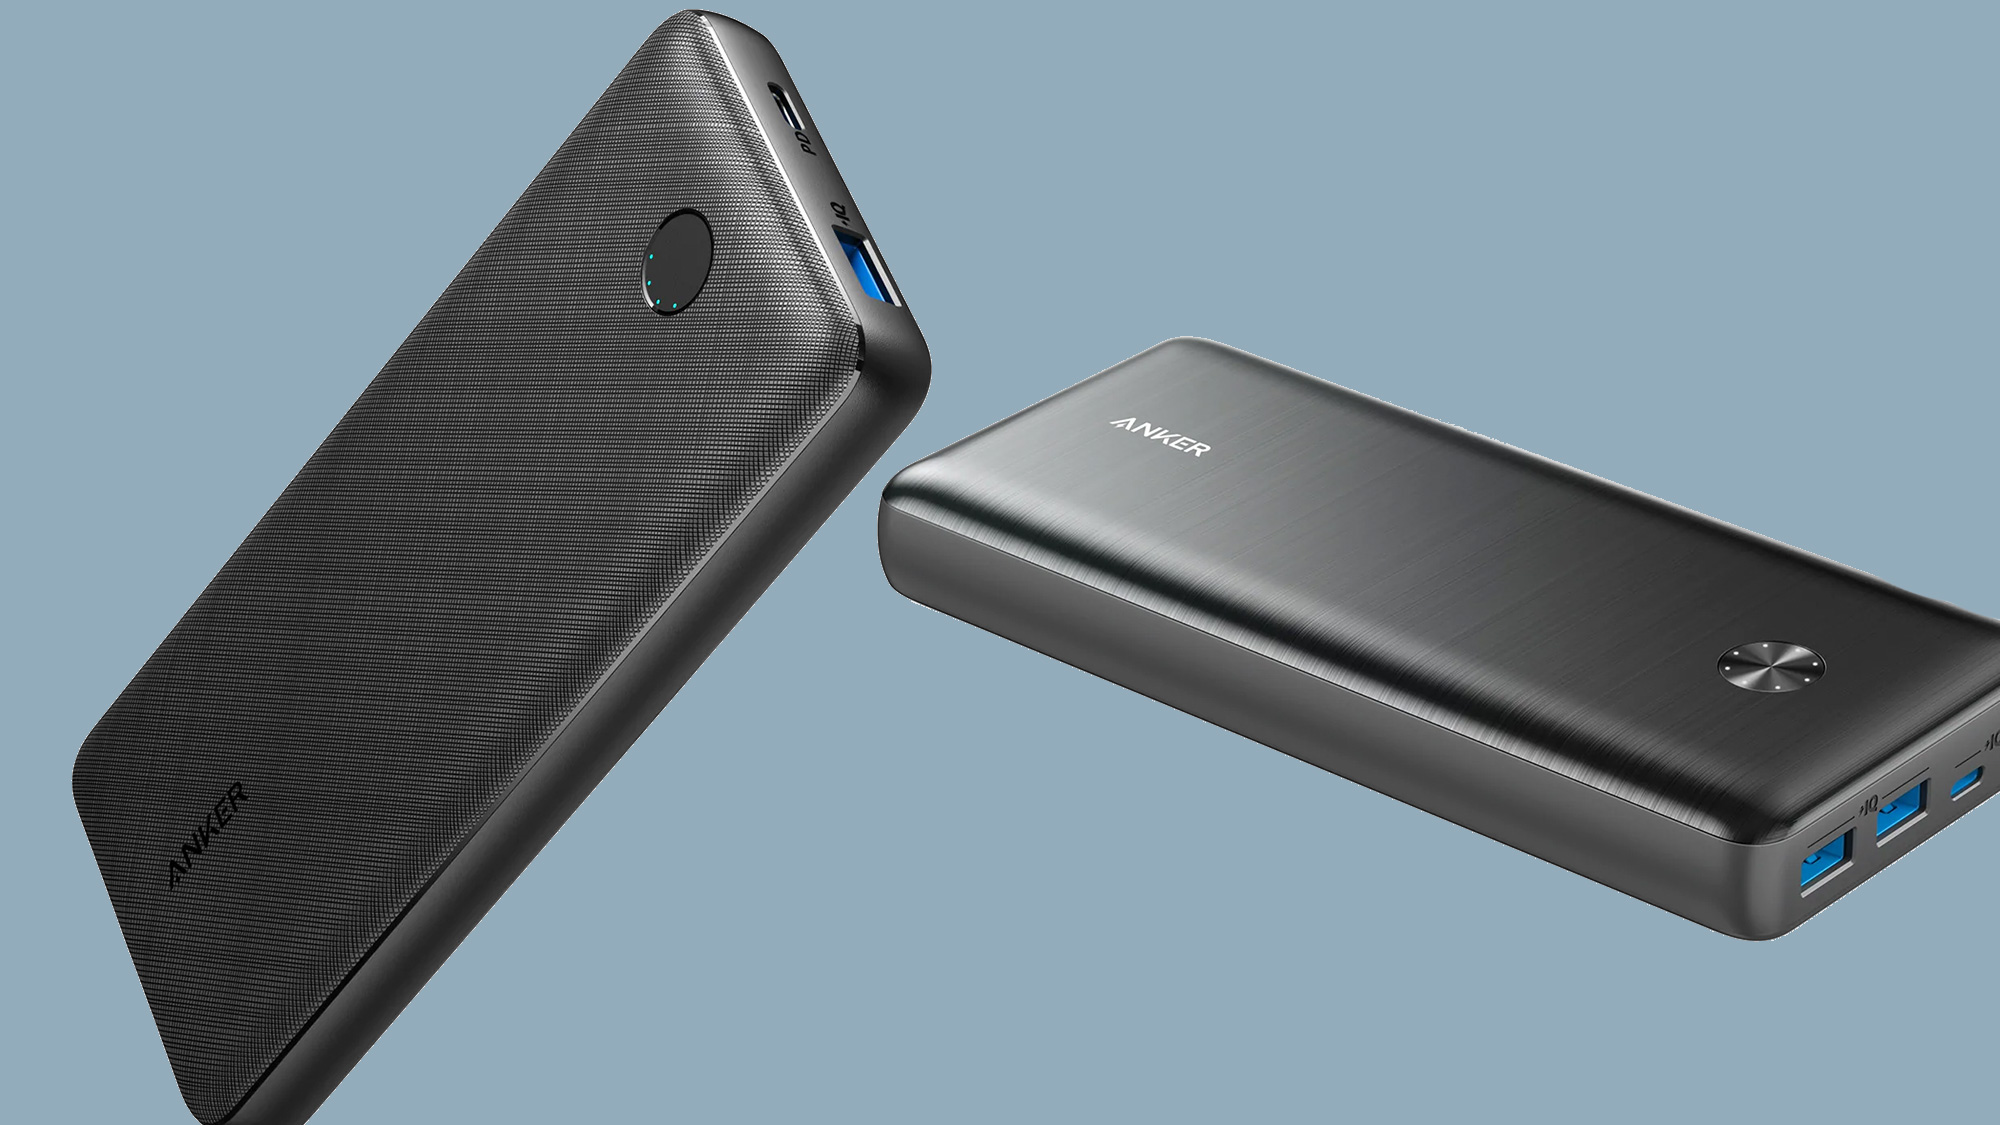 Anker’s latest portable charger is on sale even before its release